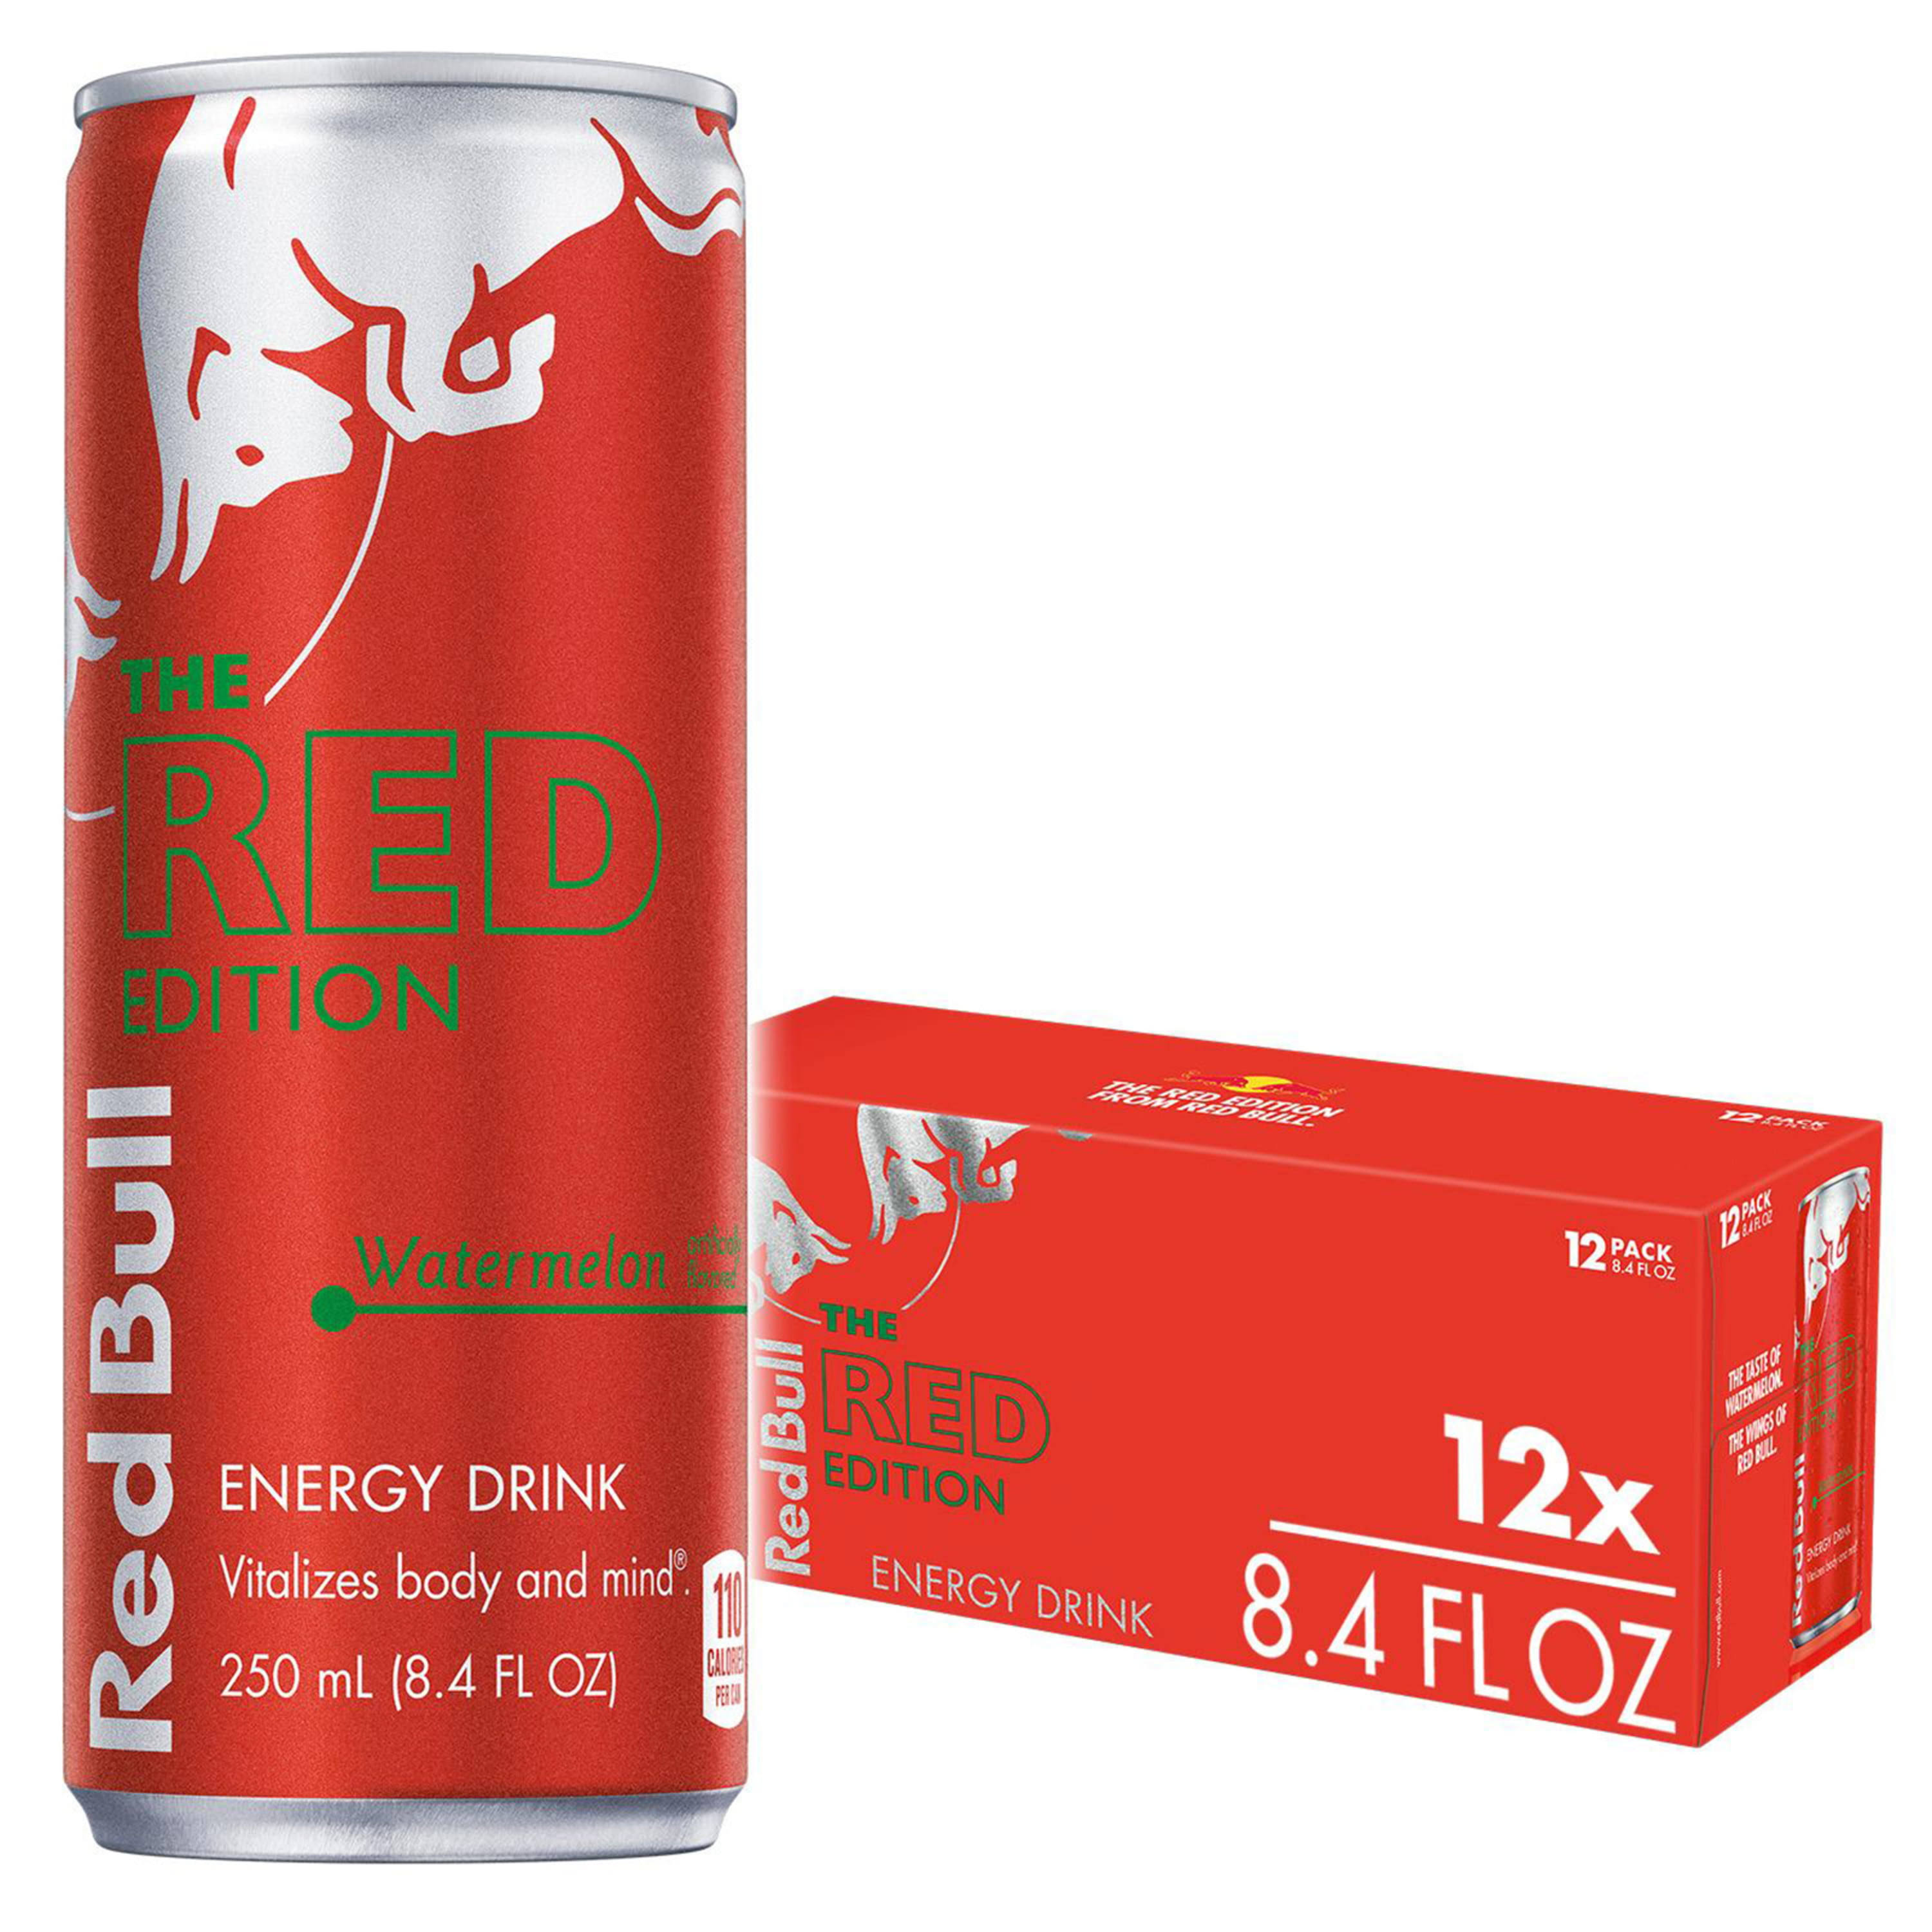 Red Bull Energy Drink, Watermelon, 12 Pack - 12 pack, 8.4 fl oz cans